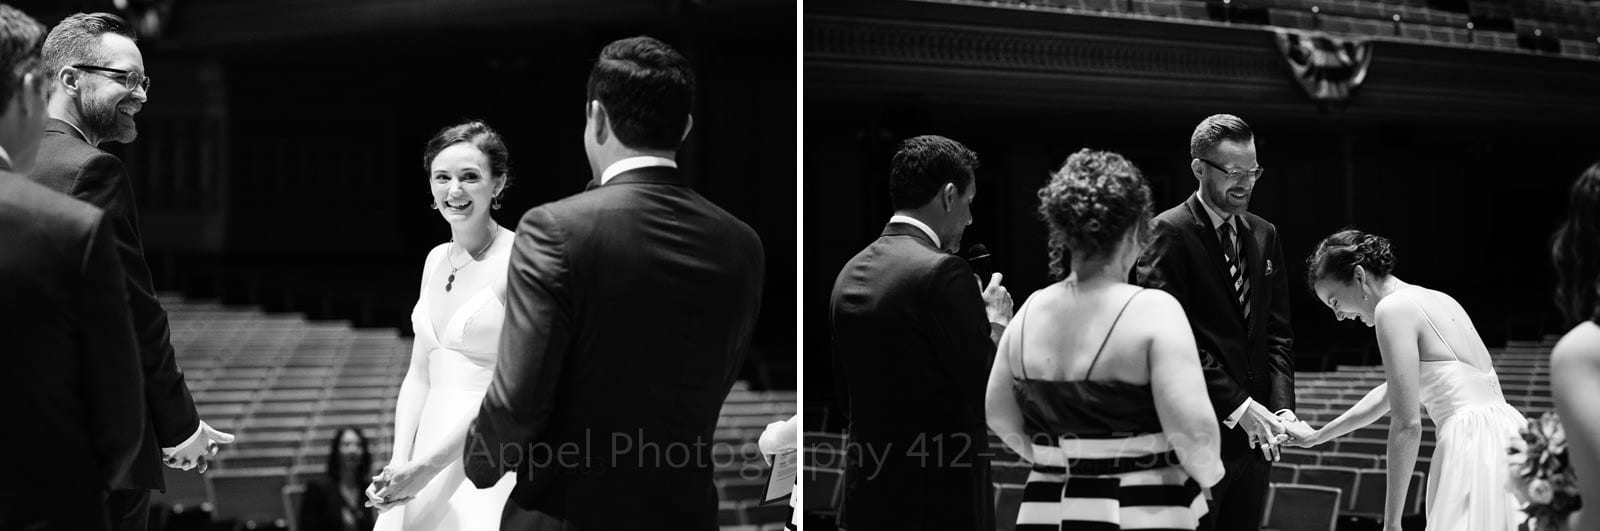 A bride and groom smile and laugh during their wedding ceremony at Soldiers and Sailors Wedding Photos.